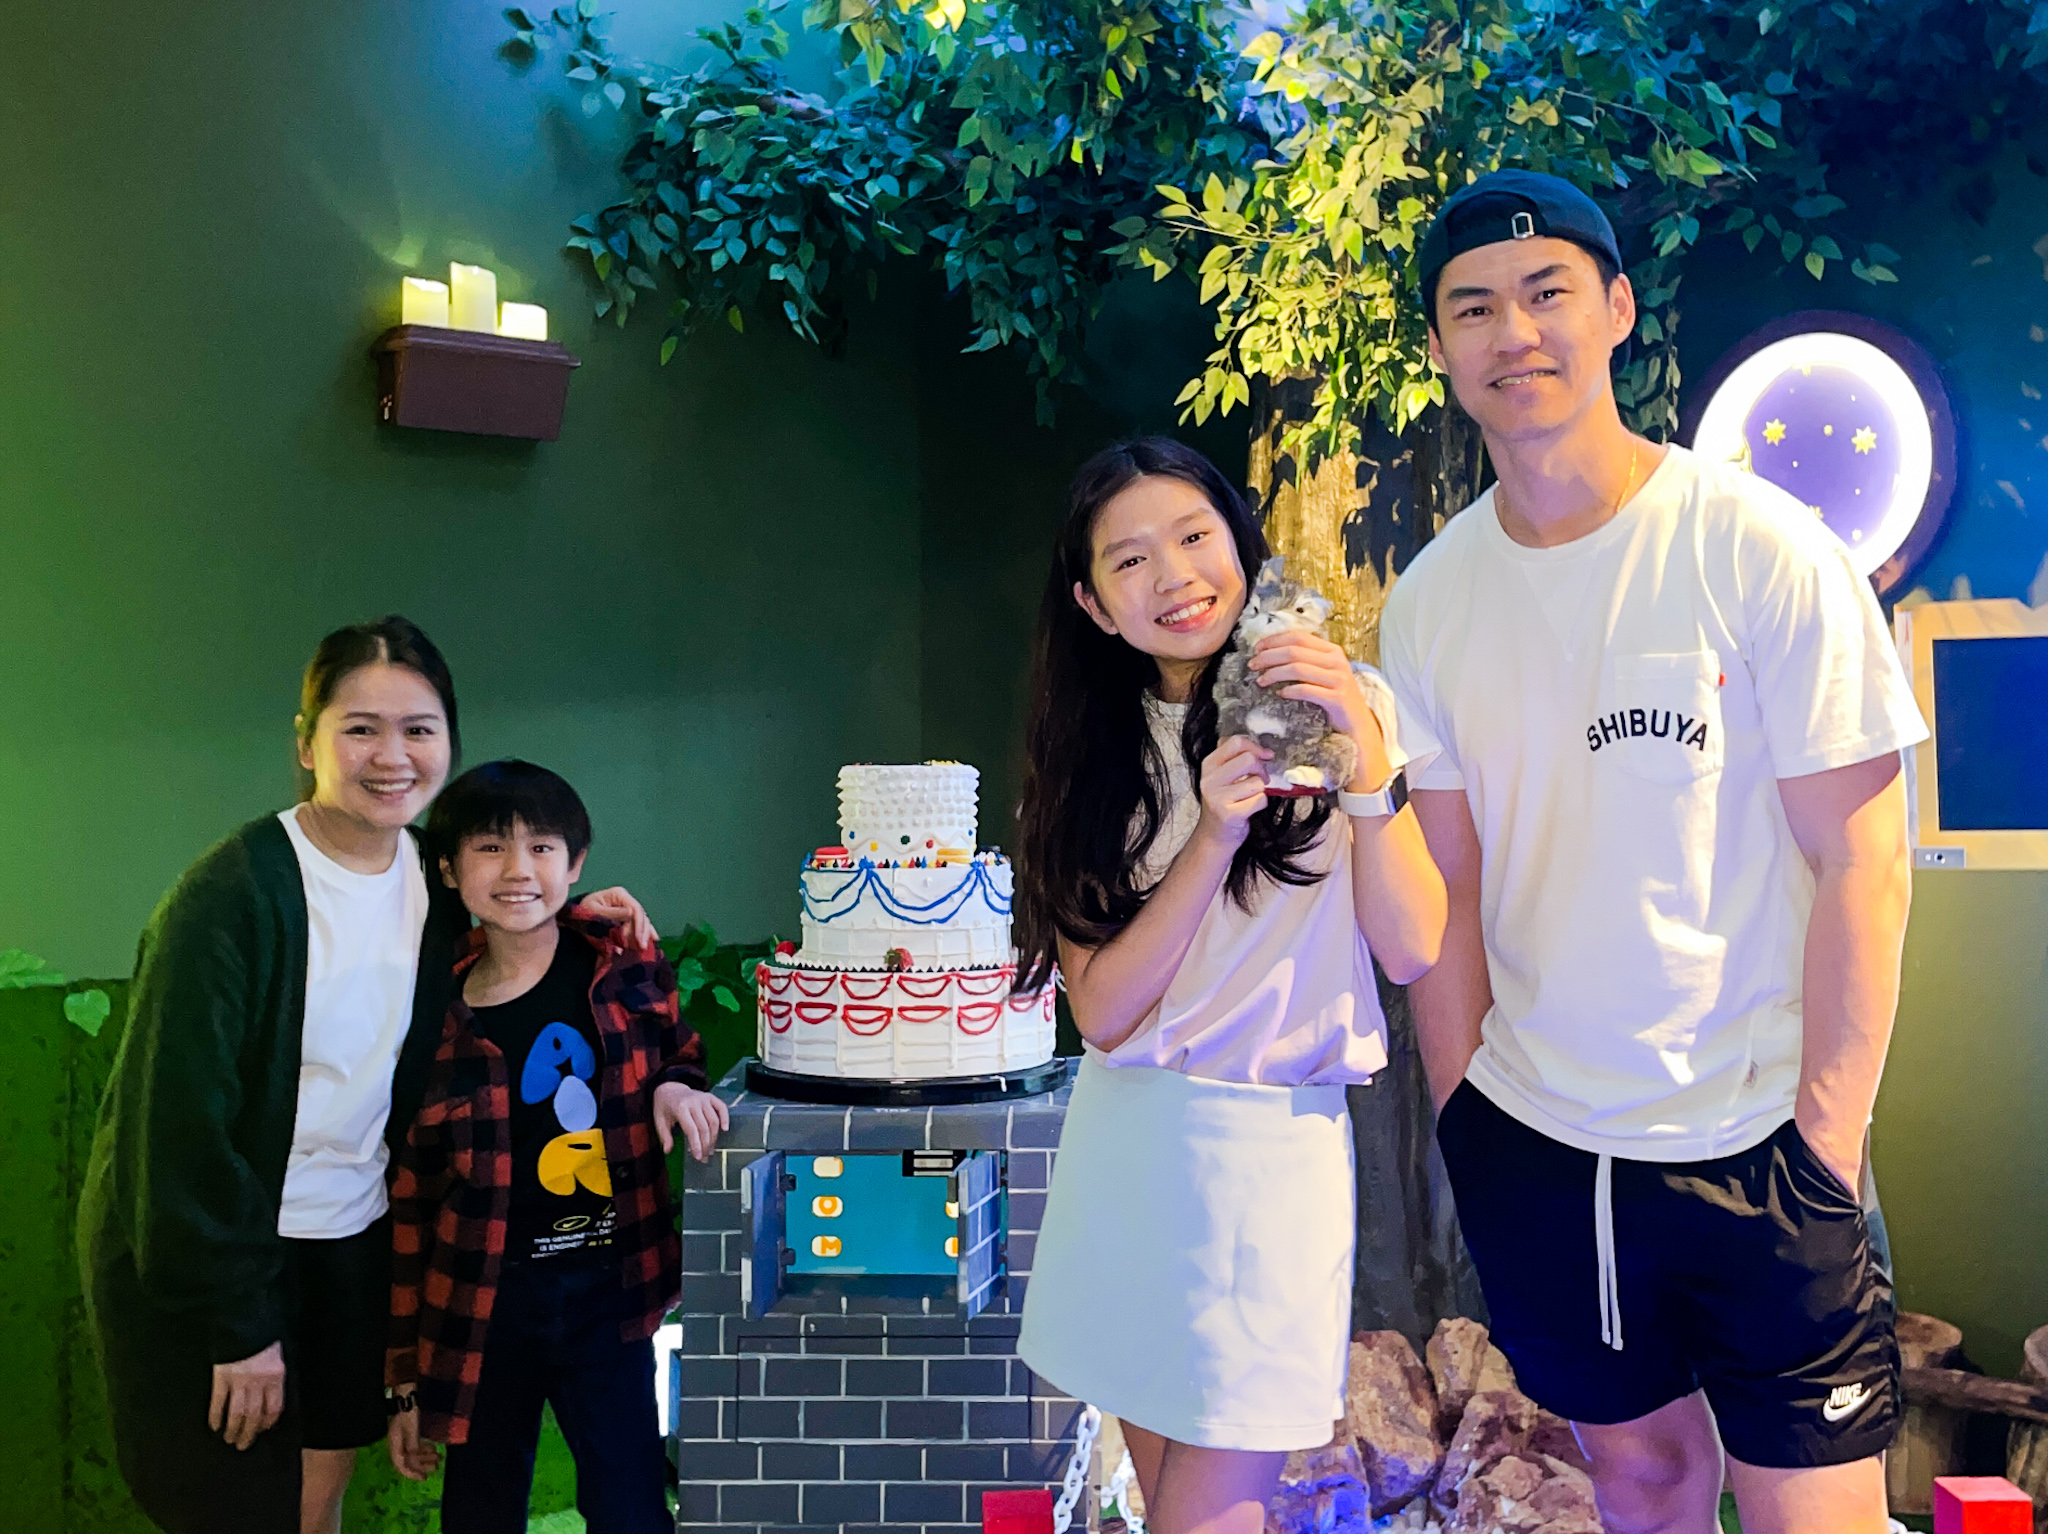 Celebrate joyous family birthdays at our Escape Rooms in Perth. Witness the happiness of families as they solve puzzles, share laughter, and create cherished memories during special occasions.